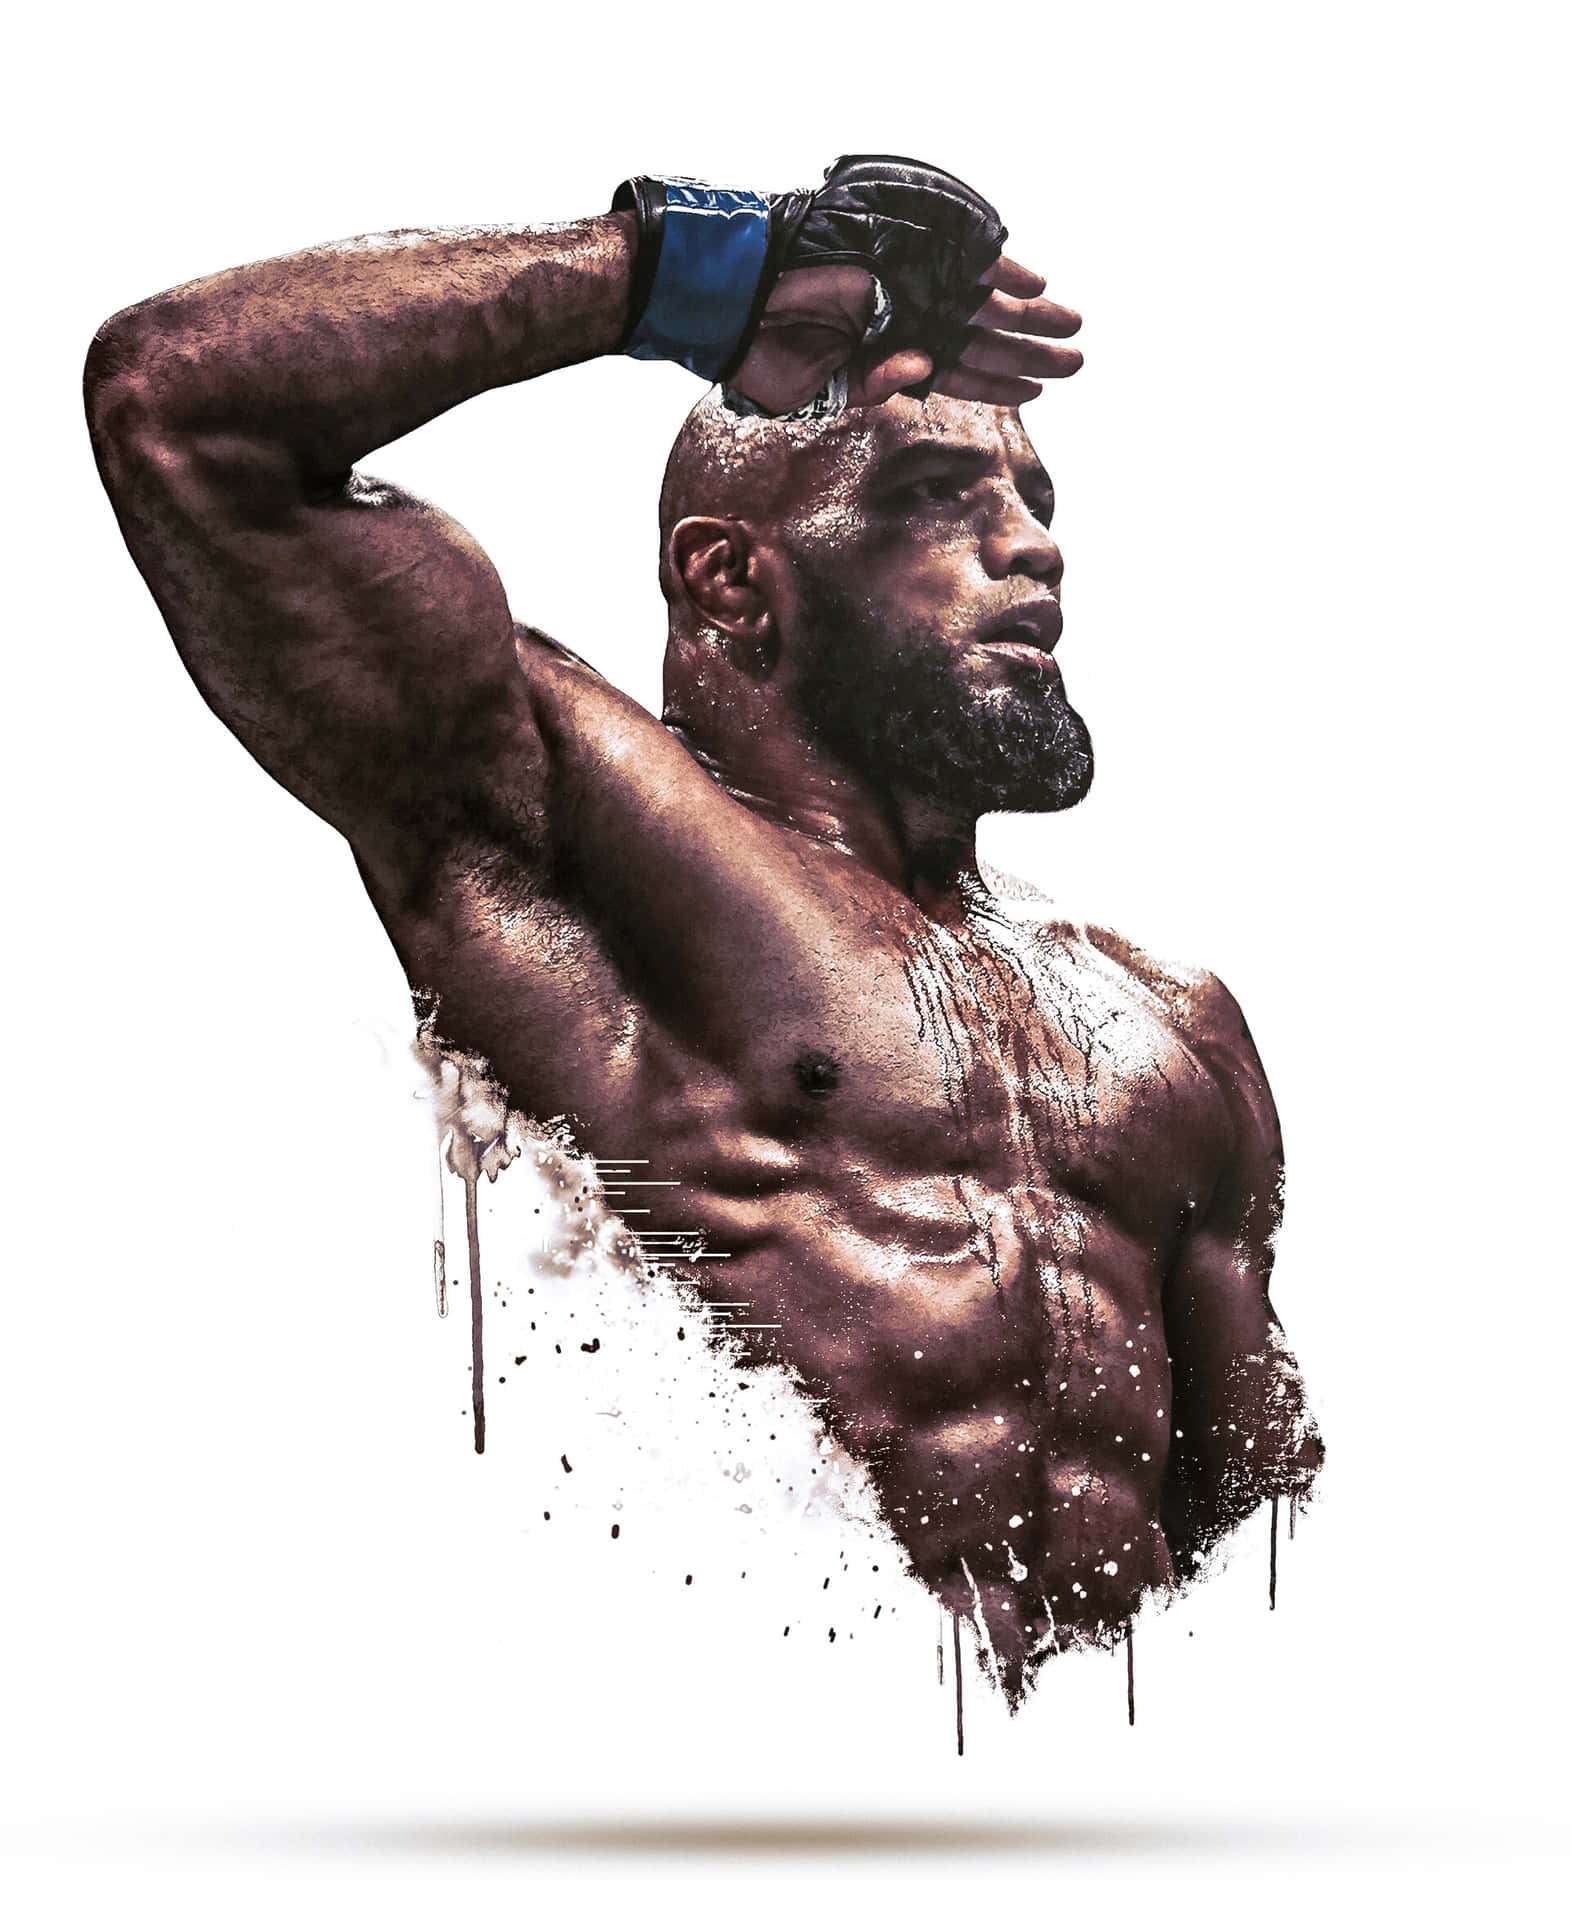 Caption: Intensity Personified - Mixed Martial Artist Yoel Romero in Action Wallpaper